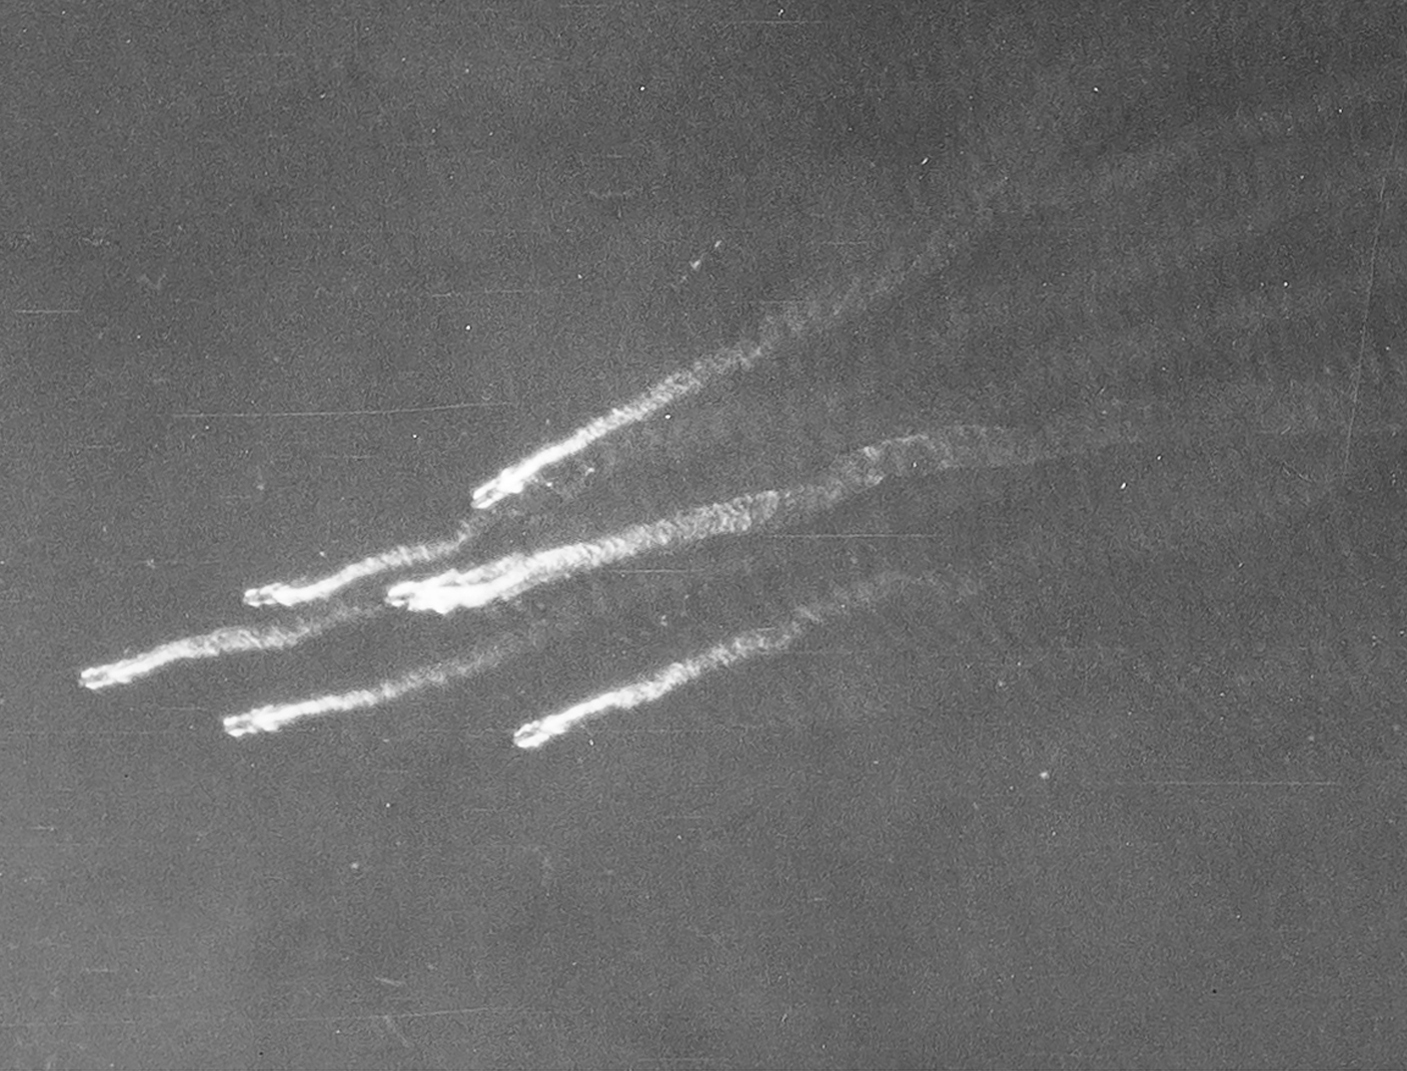 Detail from a black and white vertical aerial photograph, showing six landing craft at sea. The ships sail in an arrowhead formation towards the left edge of the image, trailing wake behind them.